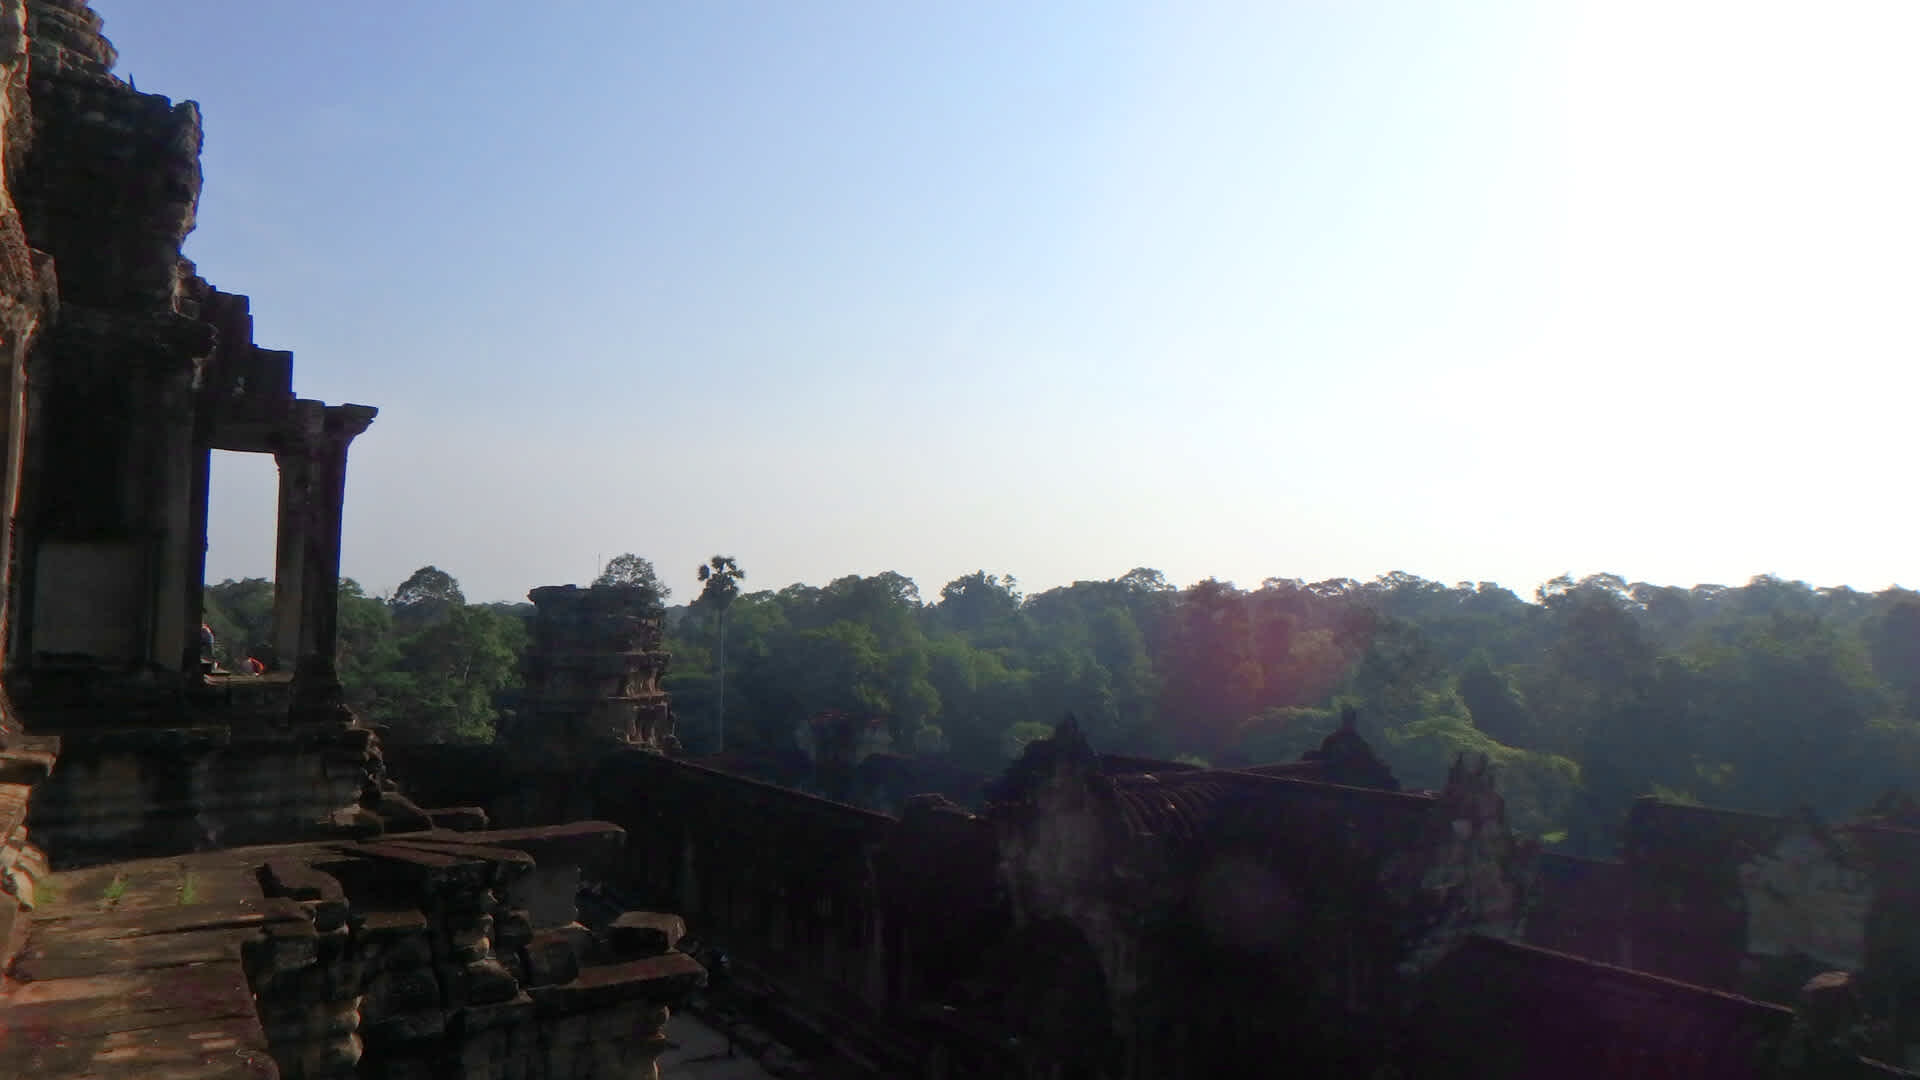 Jungle surrounding the temple of Angkor Wat.